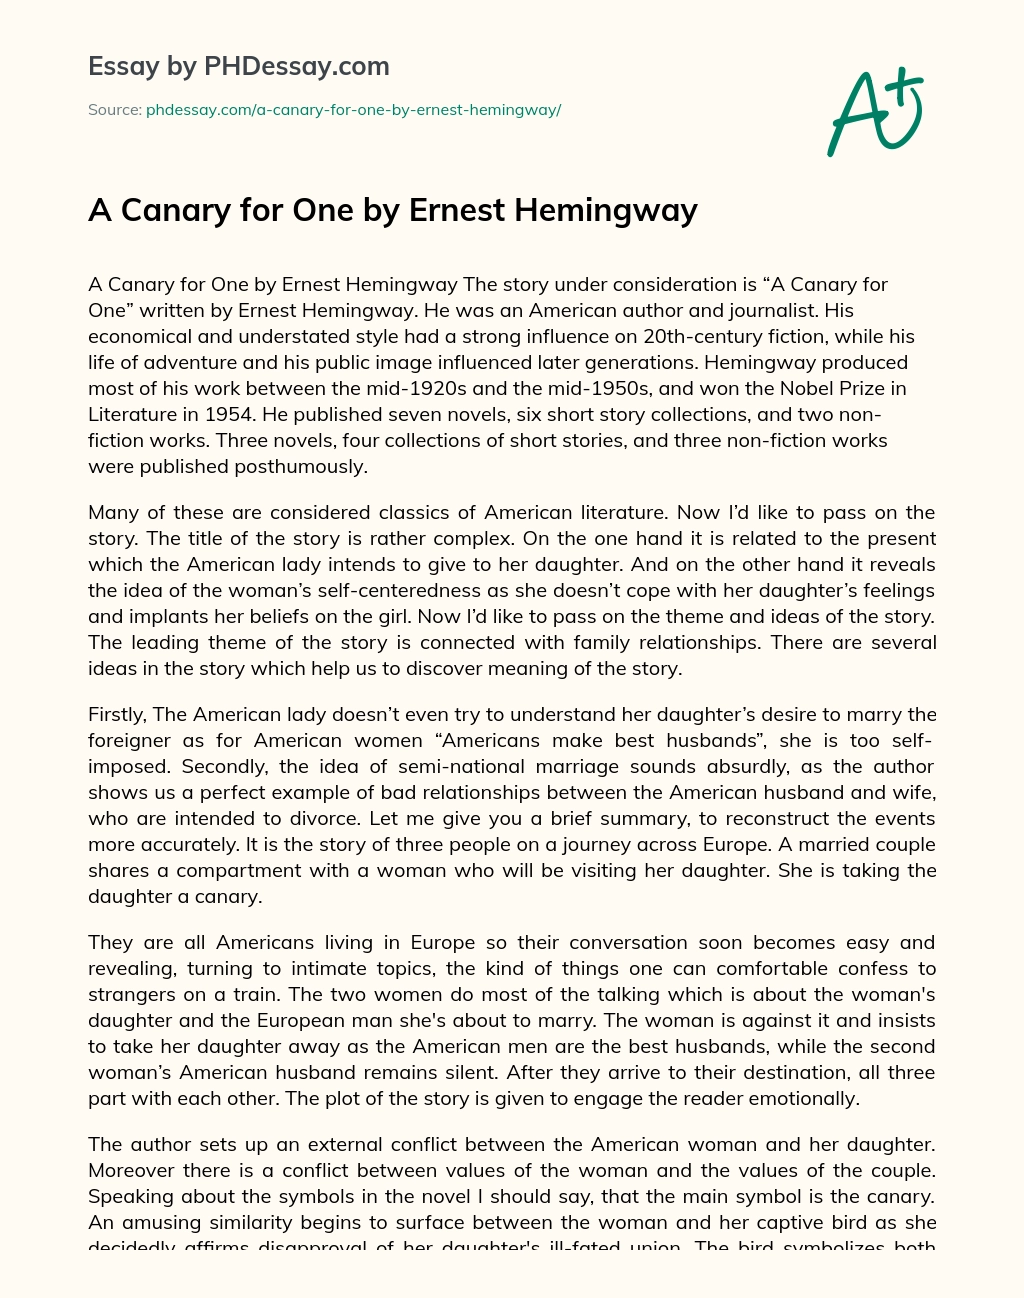 A Canary for One by Ernest Hemingway essay